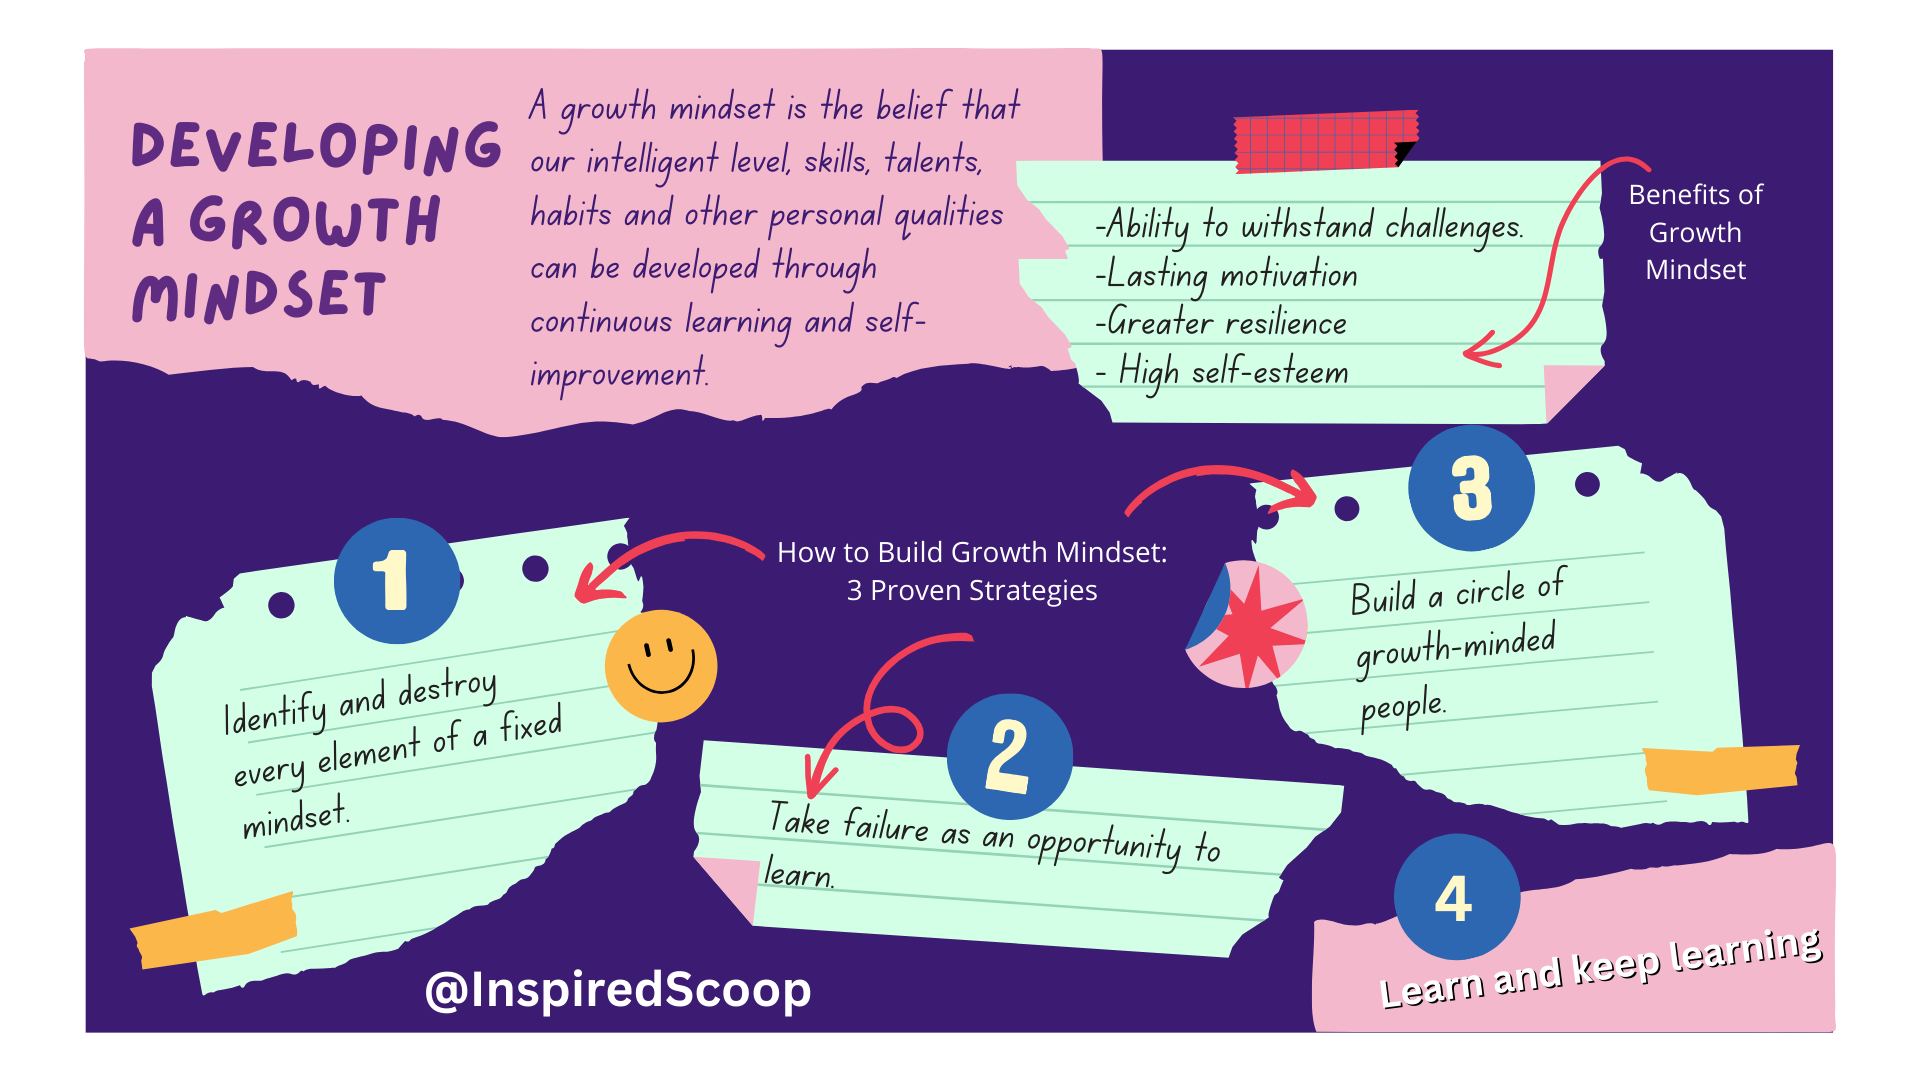 Growth mindset infographic: Meaning, Benefits and Strategies